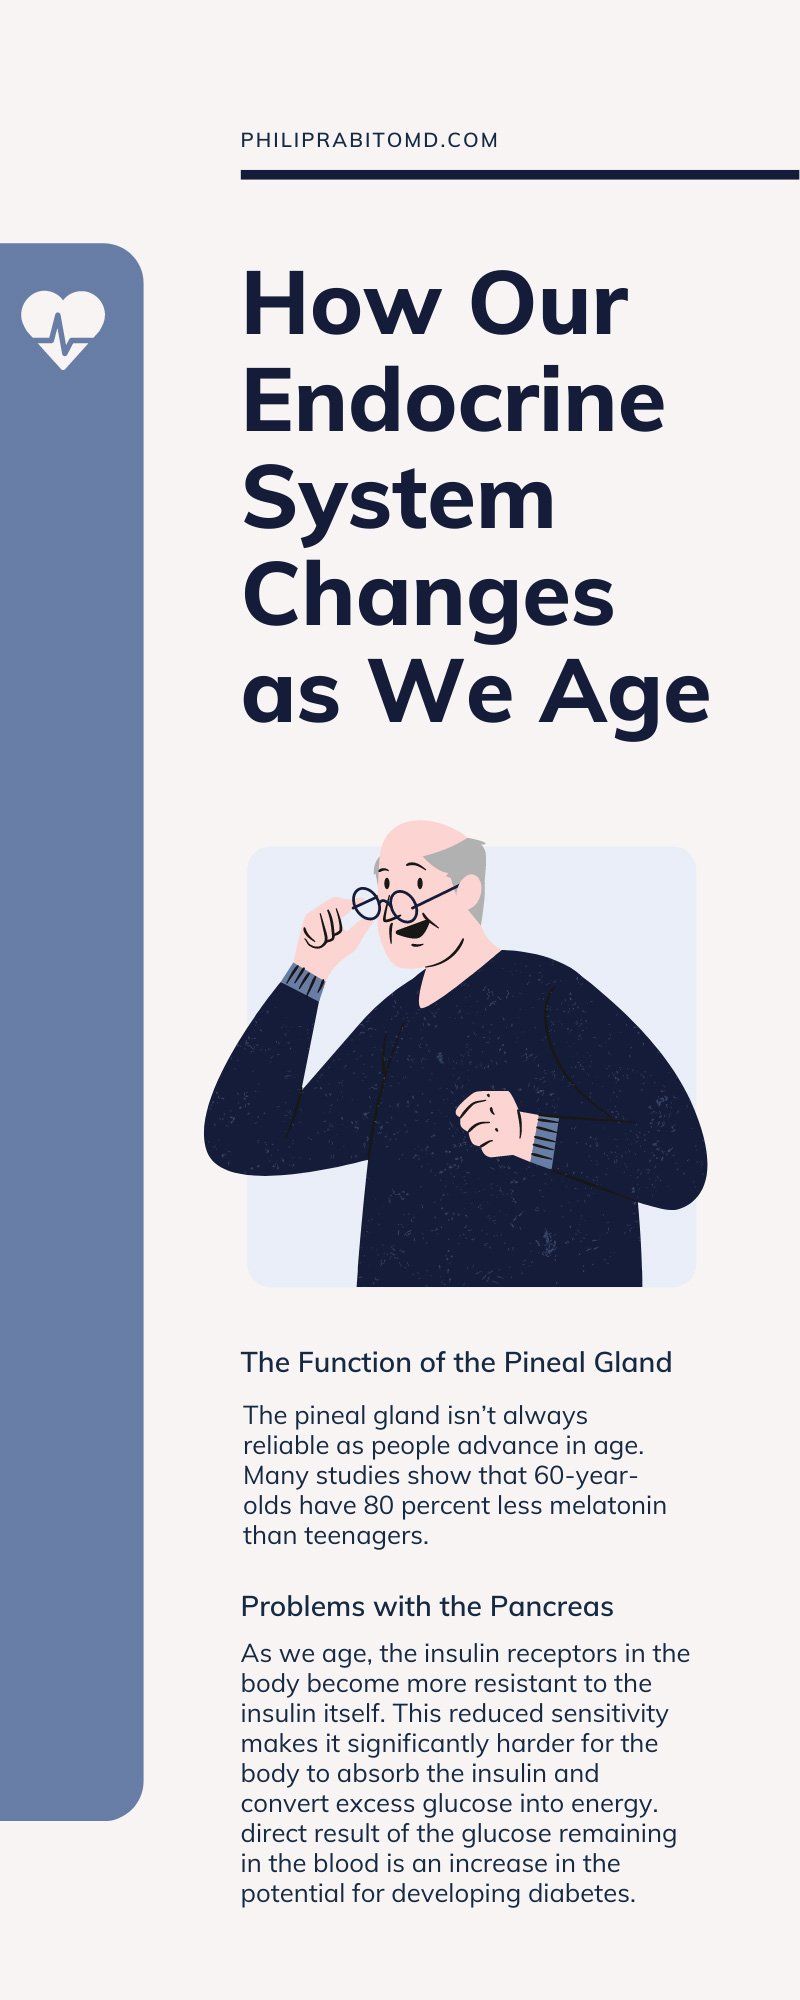 How Our Endocrine System Changes as We Age